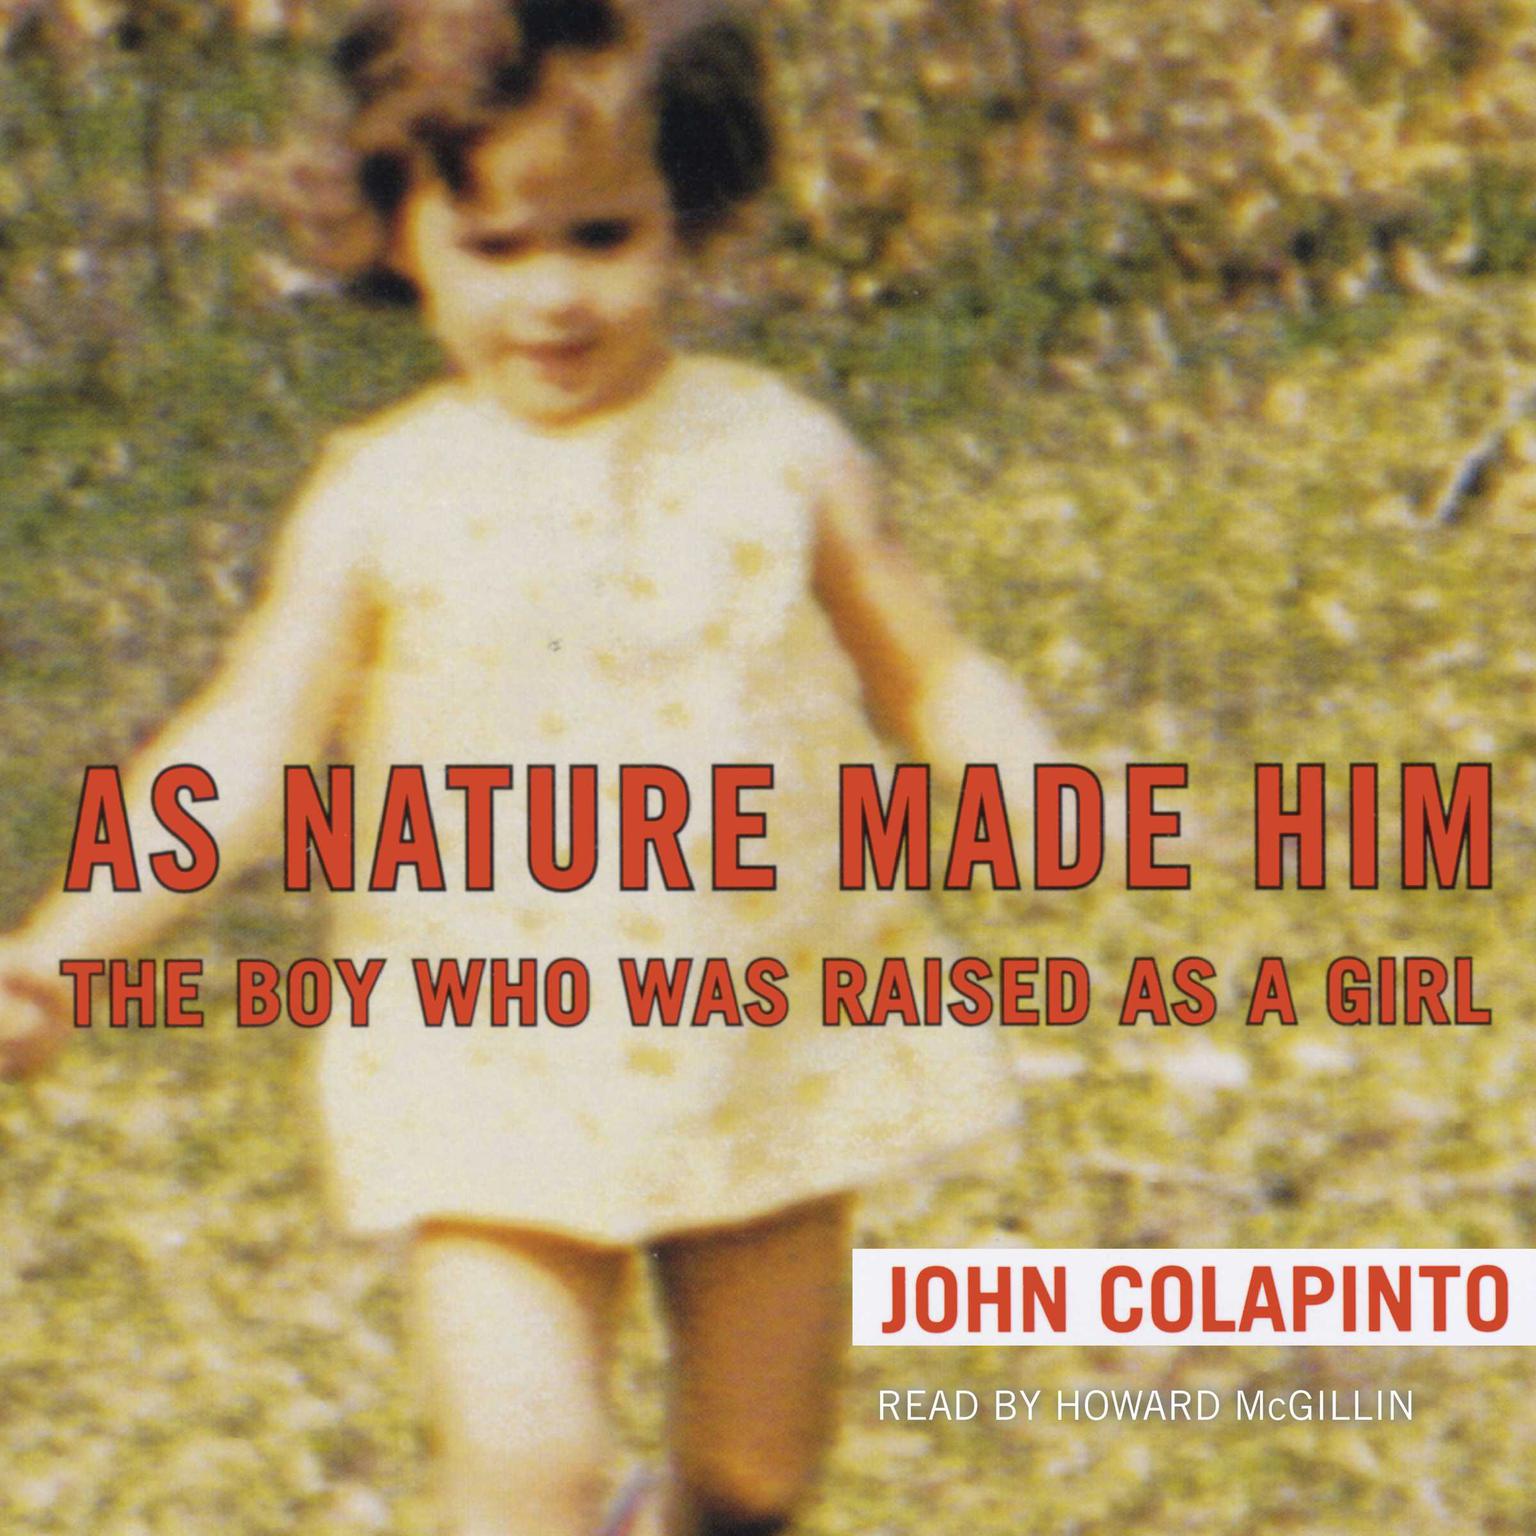 As Nature Made Him (Abridged): The Boy Who Was Raised as a Girl Audiobook, by John Colapinto